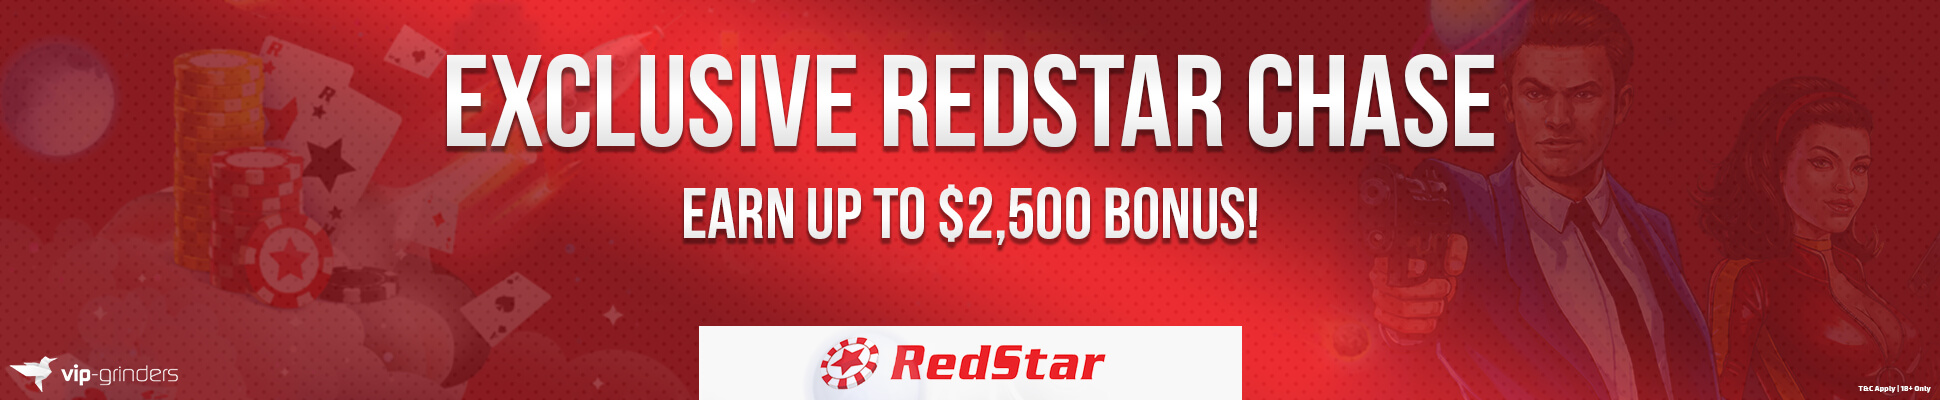 exclusive-redstar-chase-1940x400-1